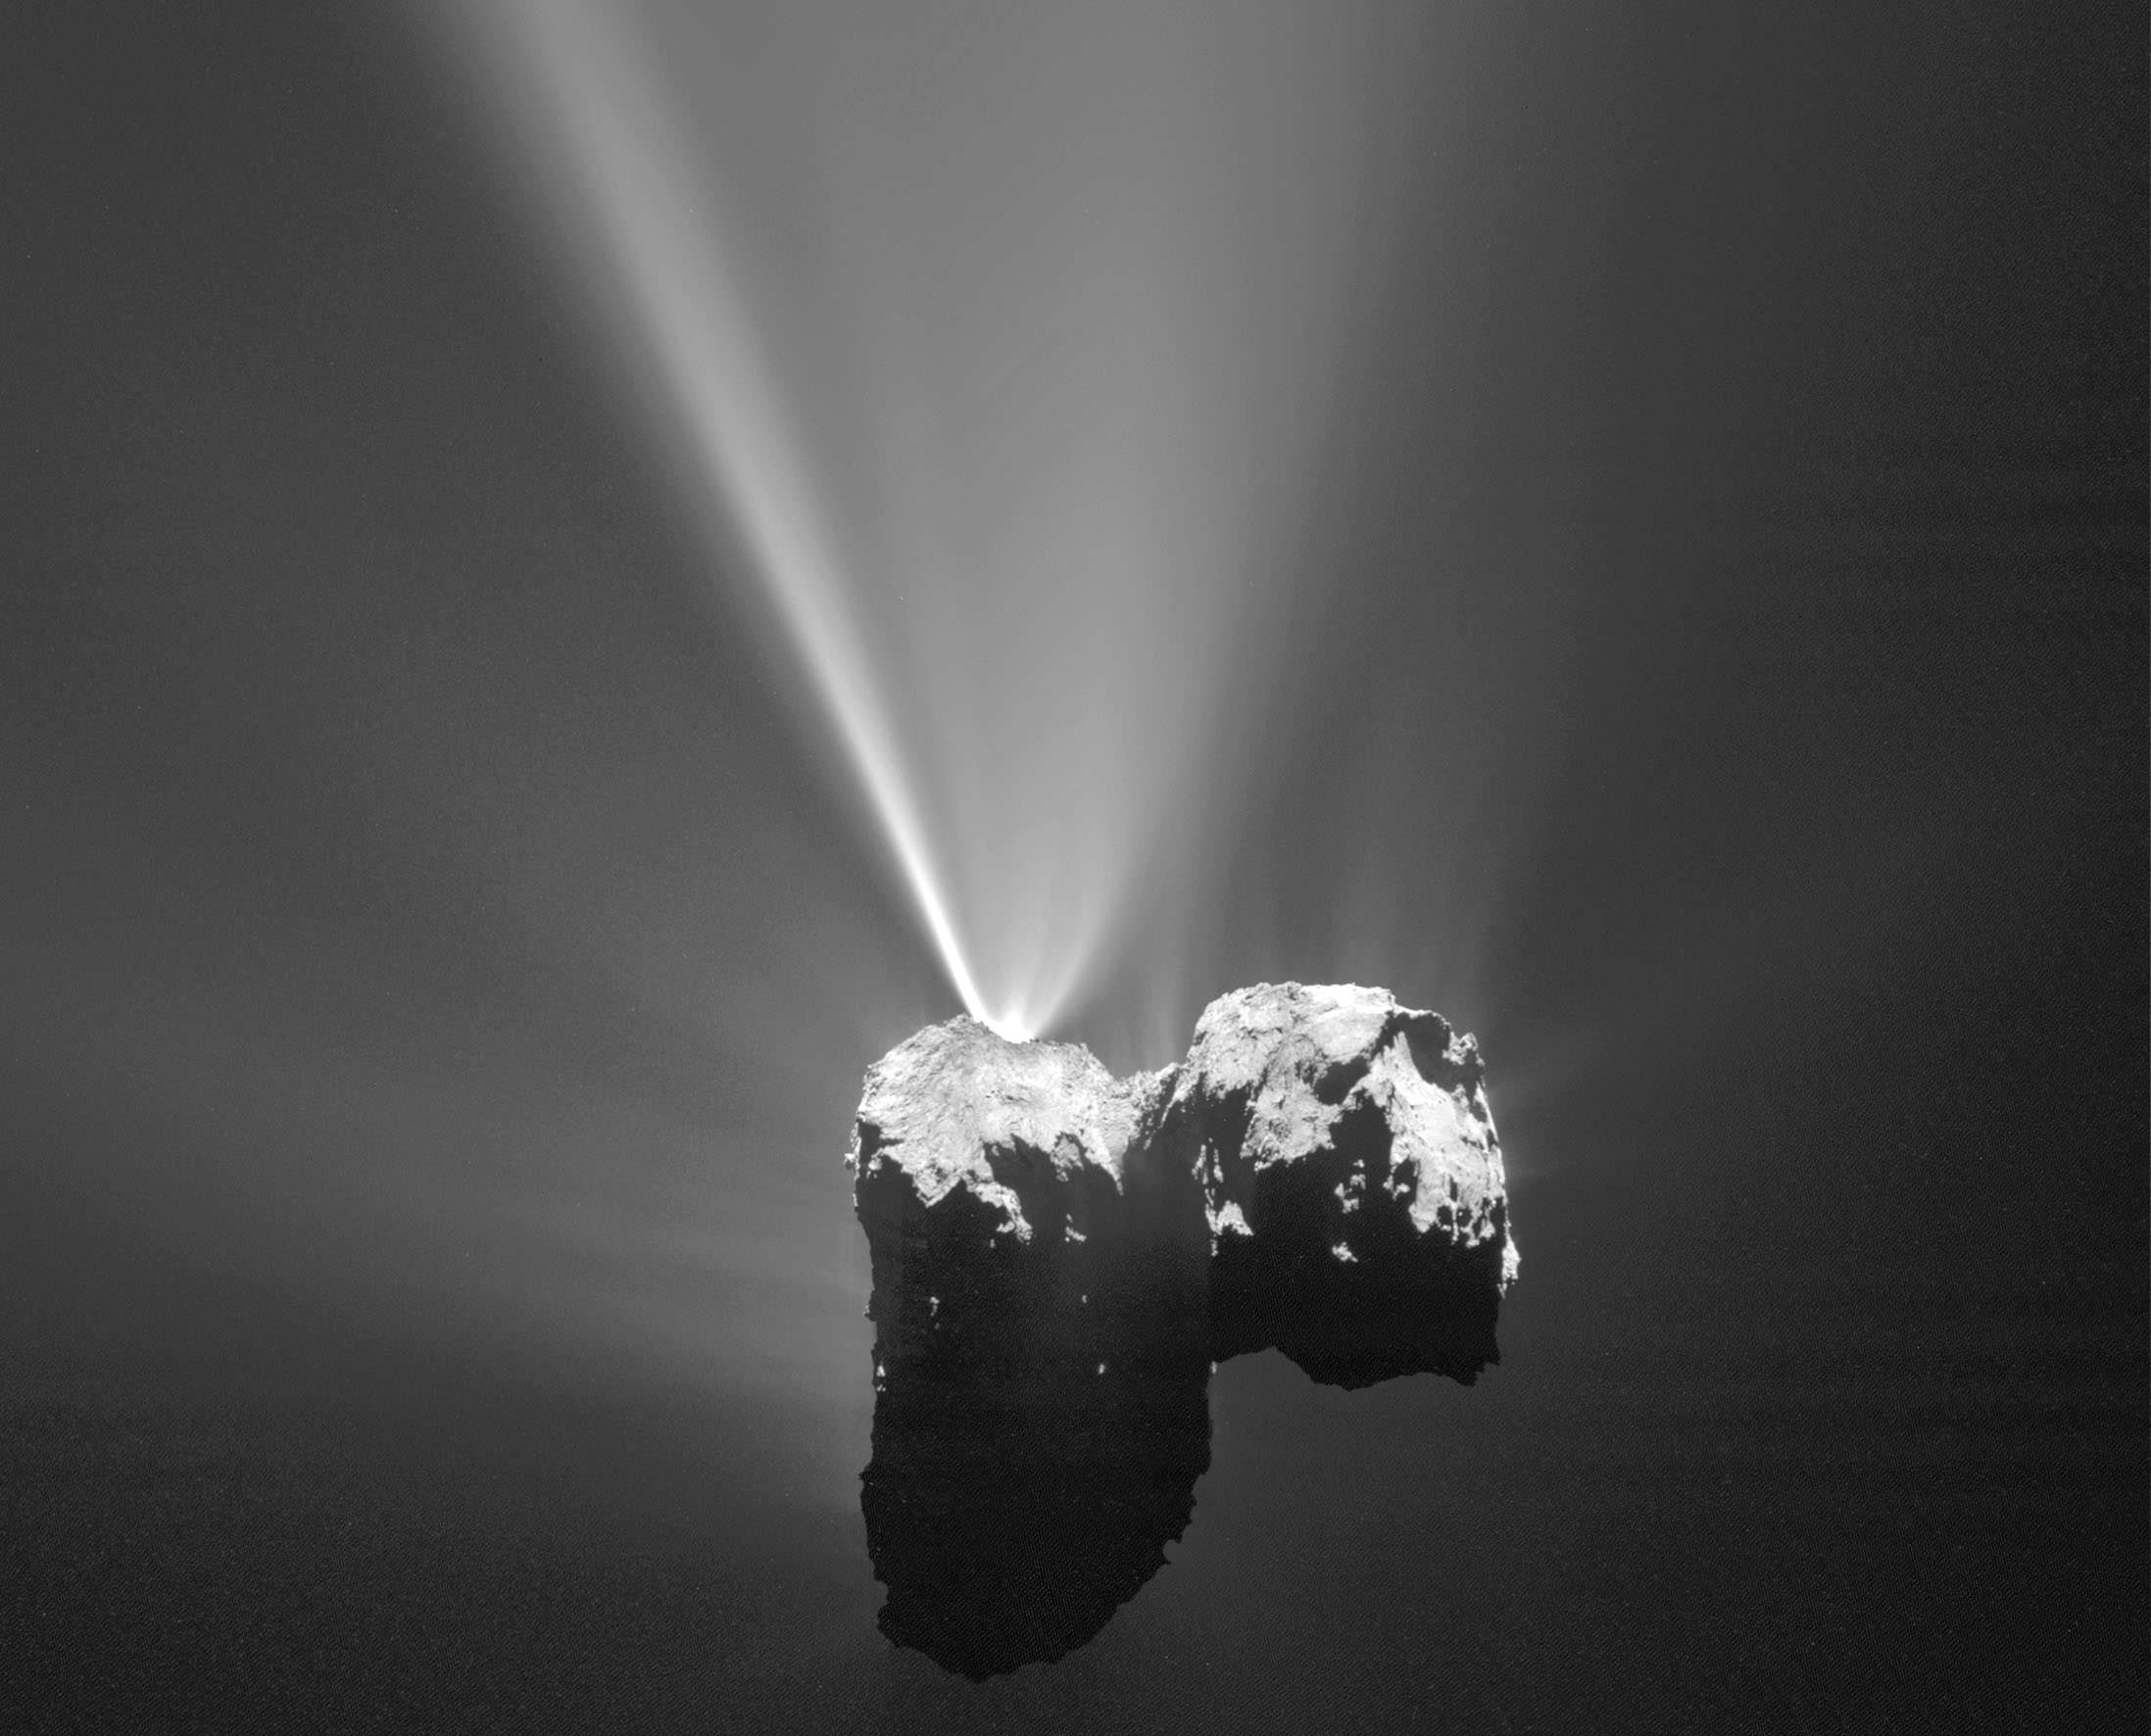 Want to get a good look at a comet's tiny nucleus and its jets of vapor and dust? Get up close in the spaceship. This photo was taken by the European Space Agency's Rosetta probe which has been orbiting Comet 67P/Churyumov-Gerasimenko since the fall of 2014. Credit: ESA